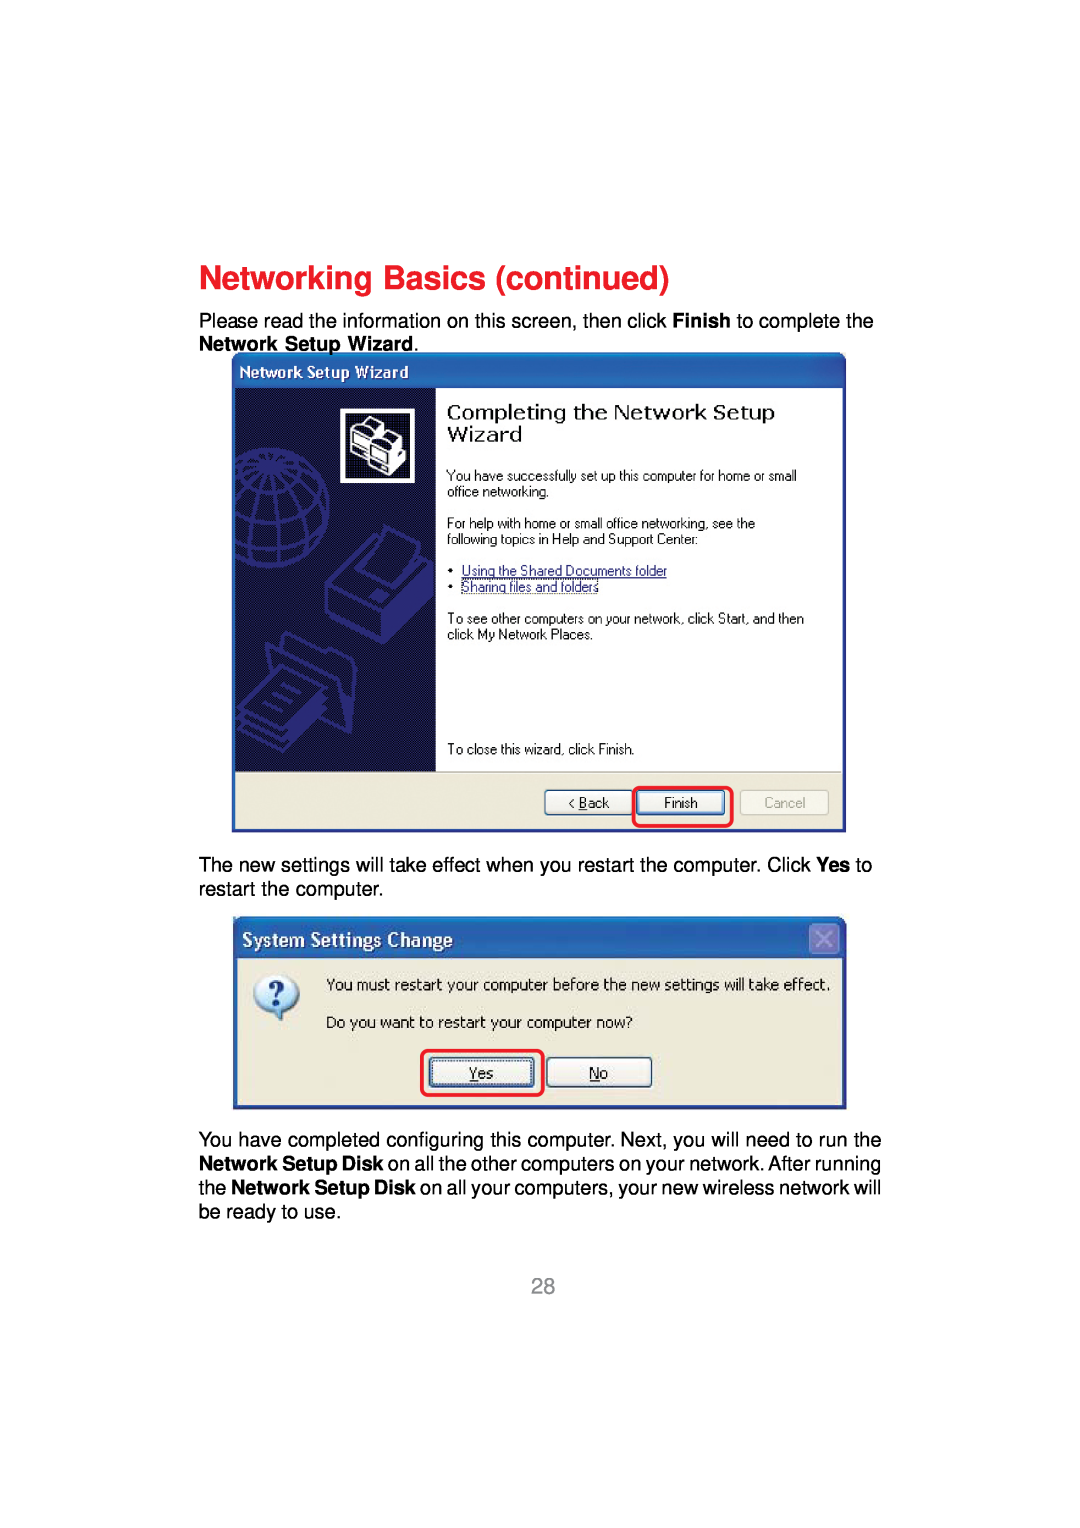 D-Link DWL-AG530 manual Networking Basics continued 